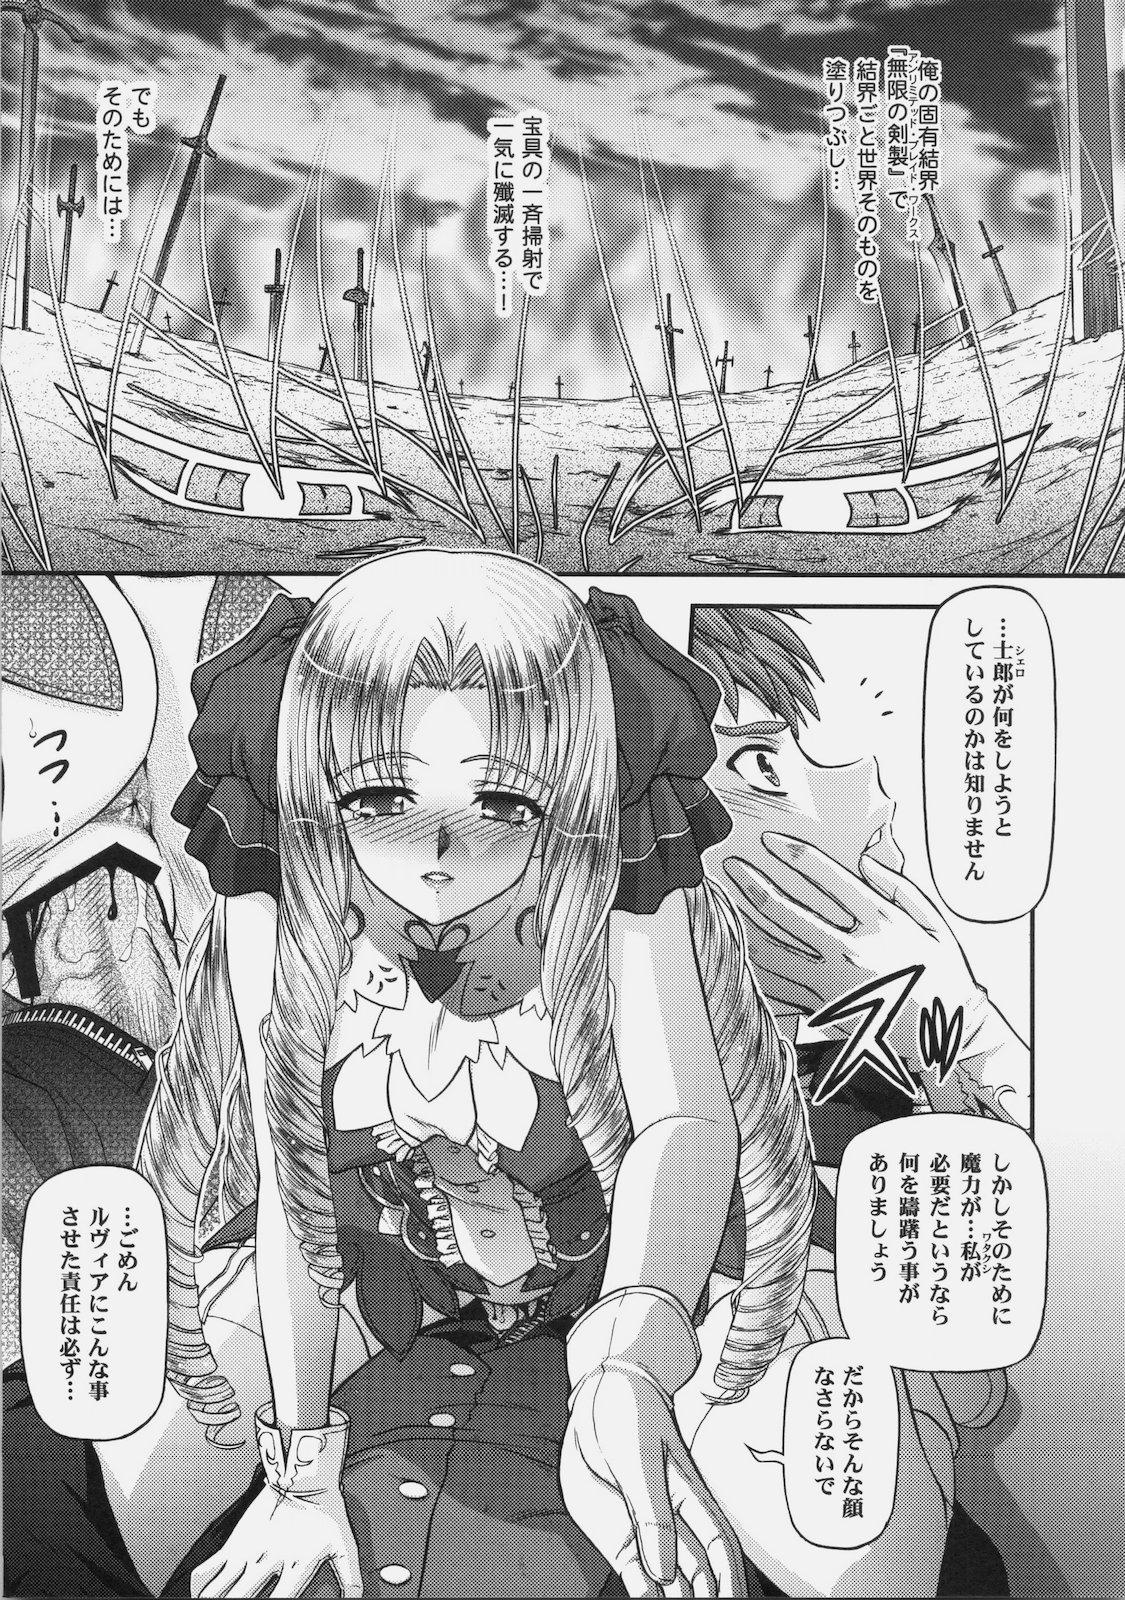 Pussy Lick BLUE BLOOD'S vol.26 - Fate hollow ataraxia Missionary Porn - Page 9